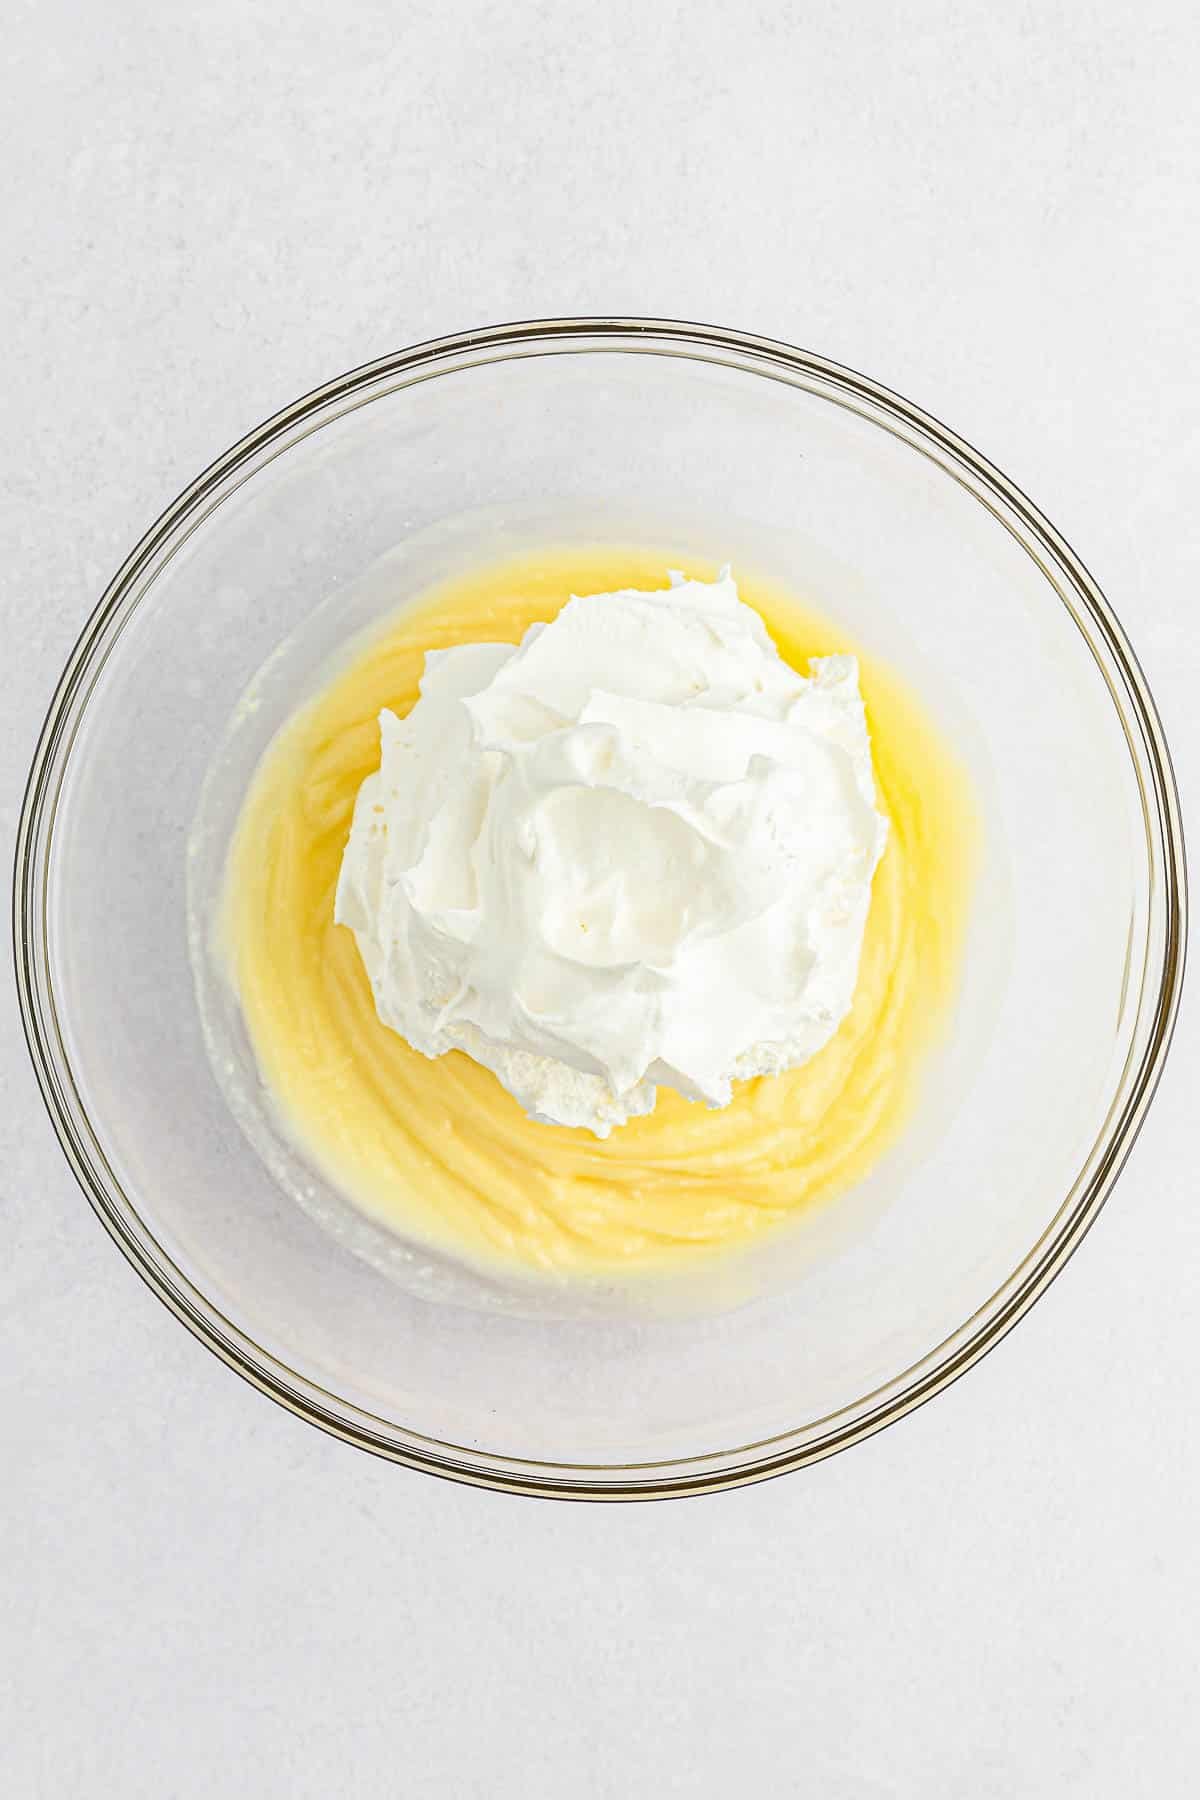 Cool whip on top of vanilla pudding in a large class bowl.